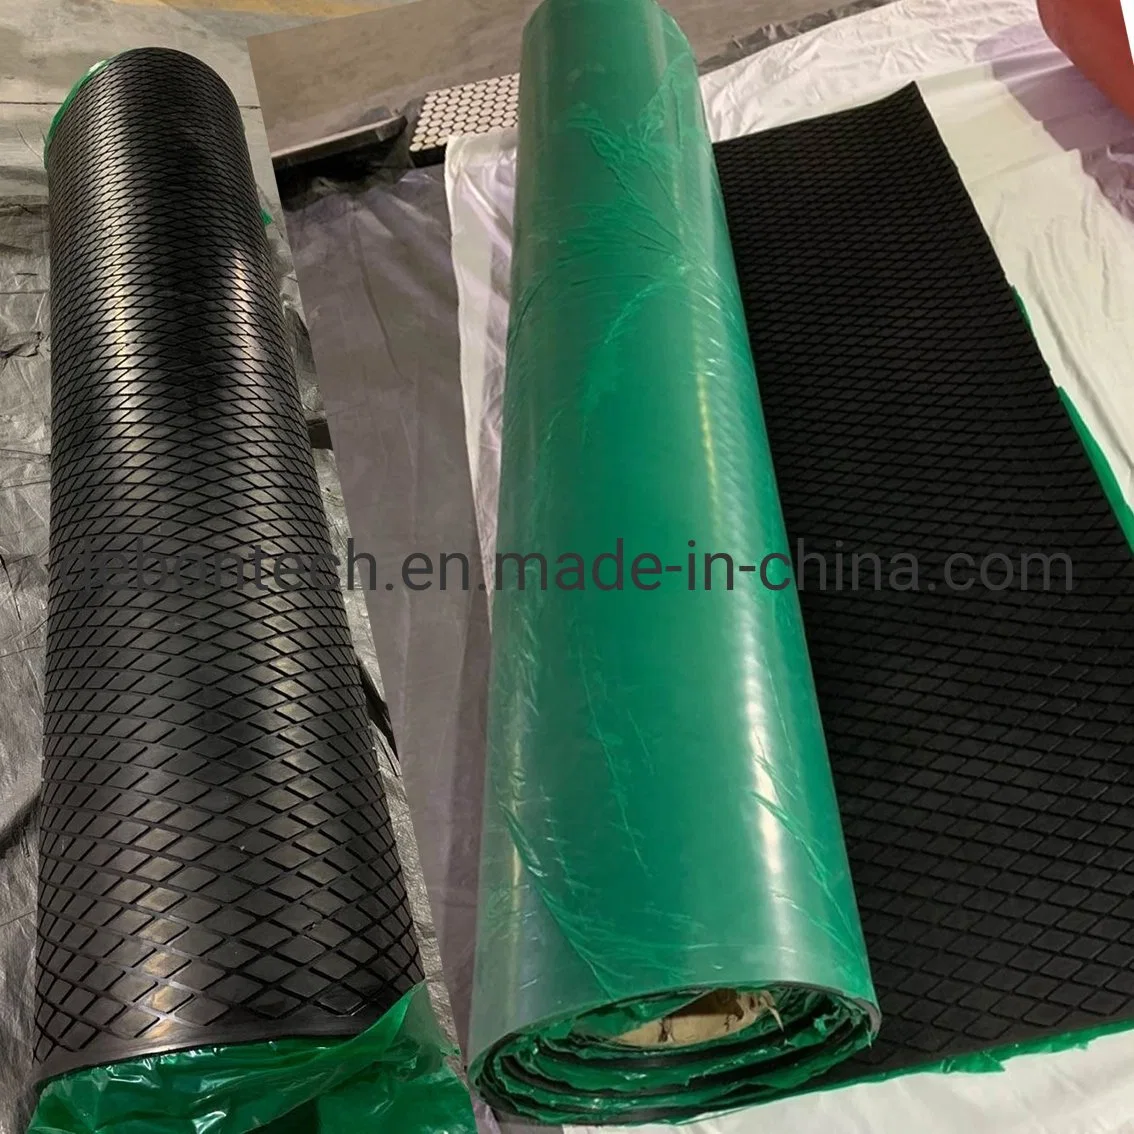 Conveyor Drum Lining Rubber with a Rhomboid Profile and a Contact Cn Layer